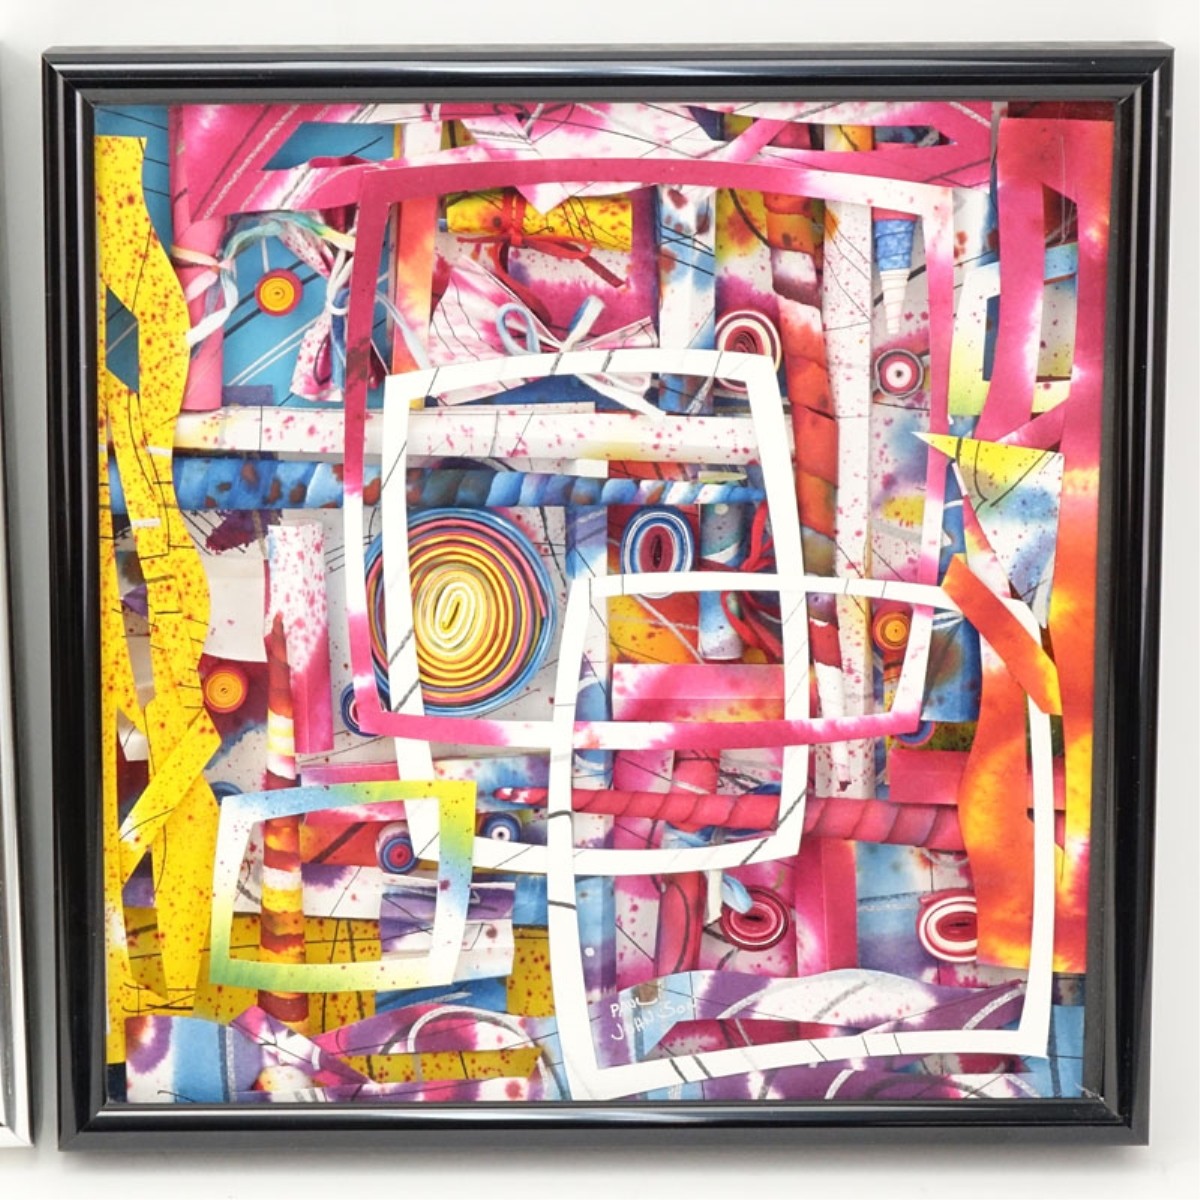 Paul Johnson British (20C) Two (2) Abstracts